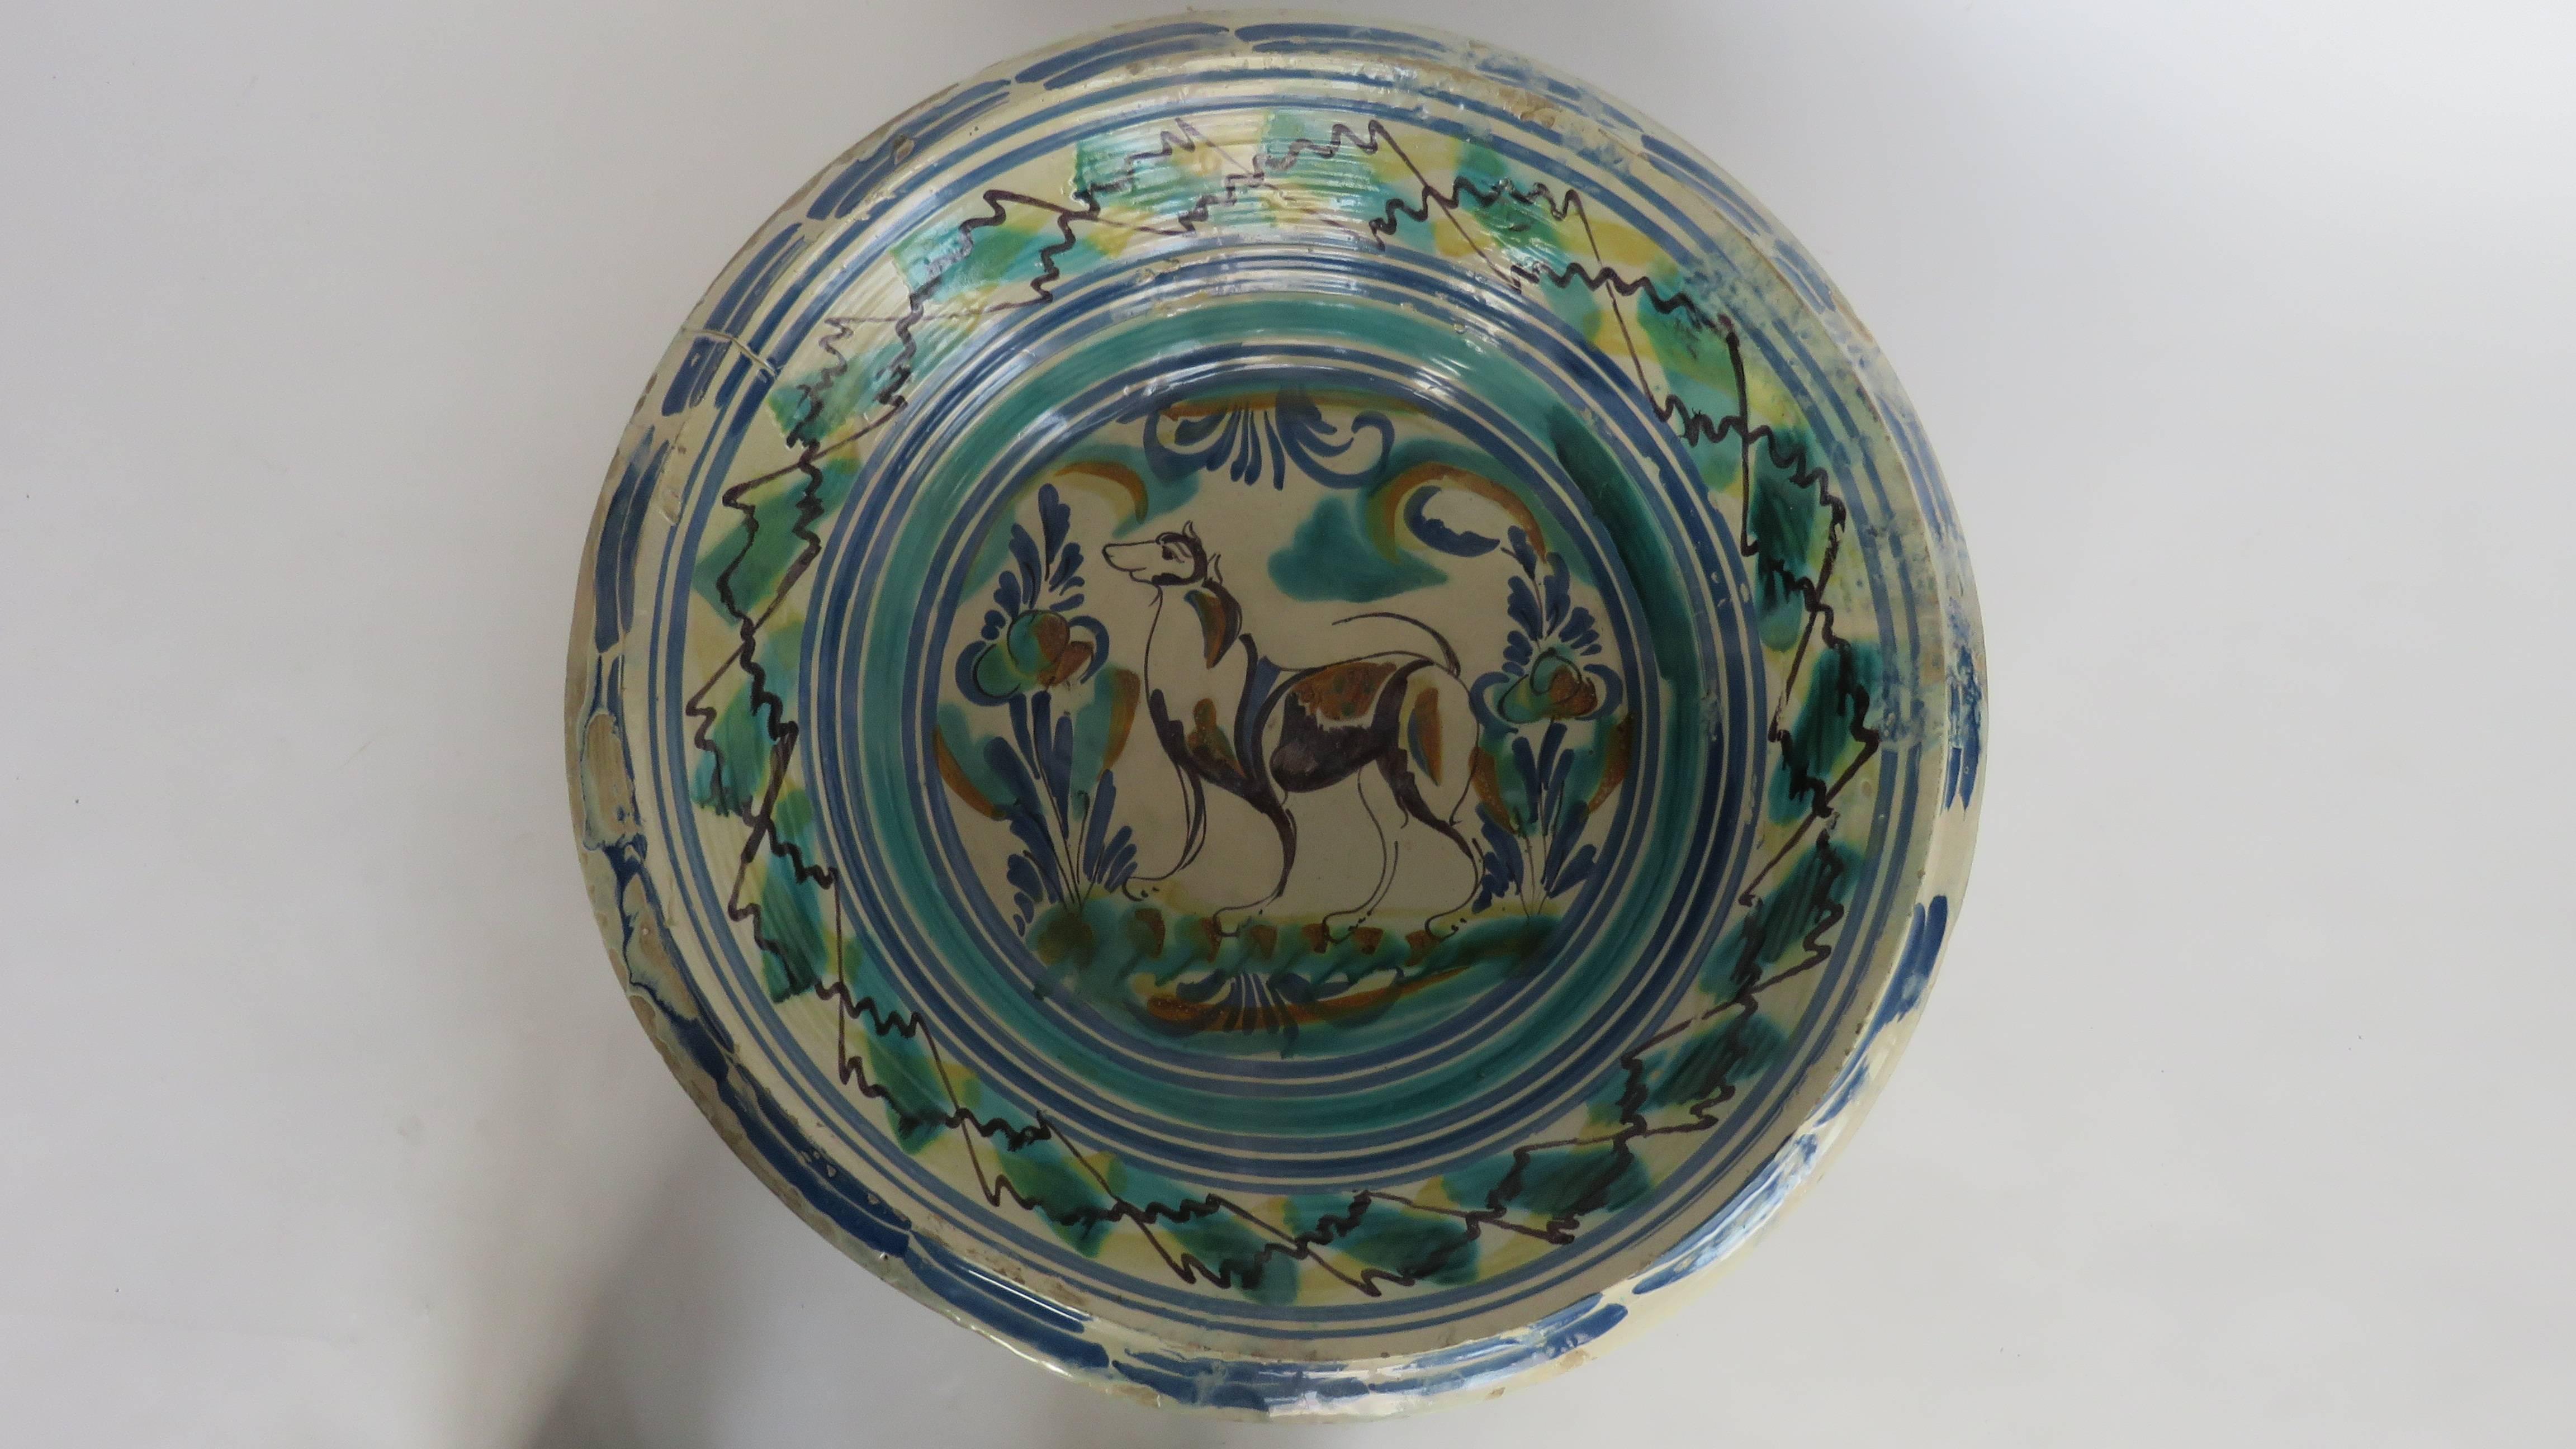 Glazes of copper green, cobalt blue, yellow and manganese on a bone white slip depicting a dog in a landscape setting with flowers. Origin: Sevilla, Spain.

Iron support not included.